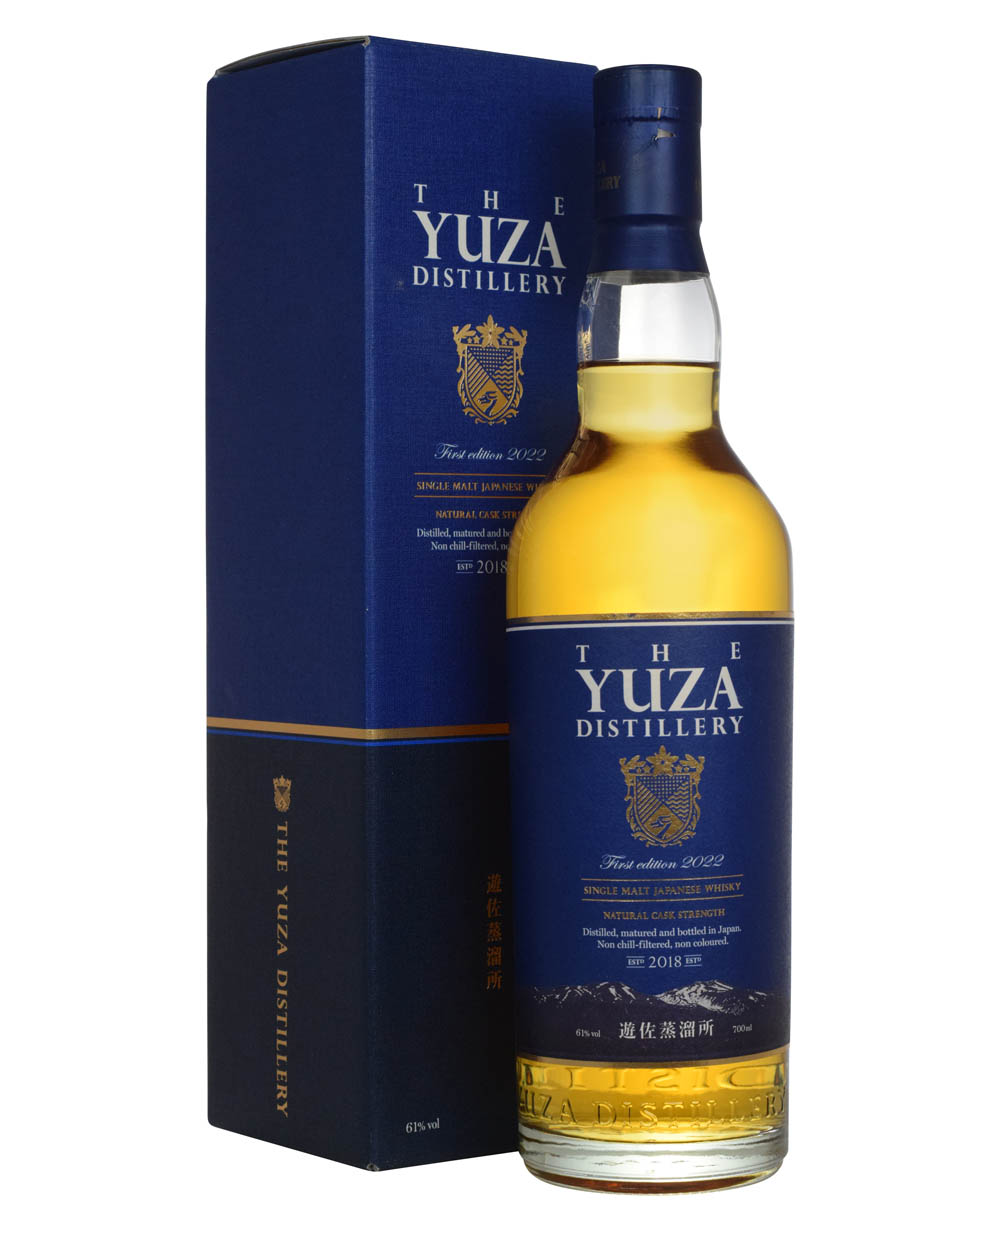 Yuza First Edition 2022 - Musthave Malts